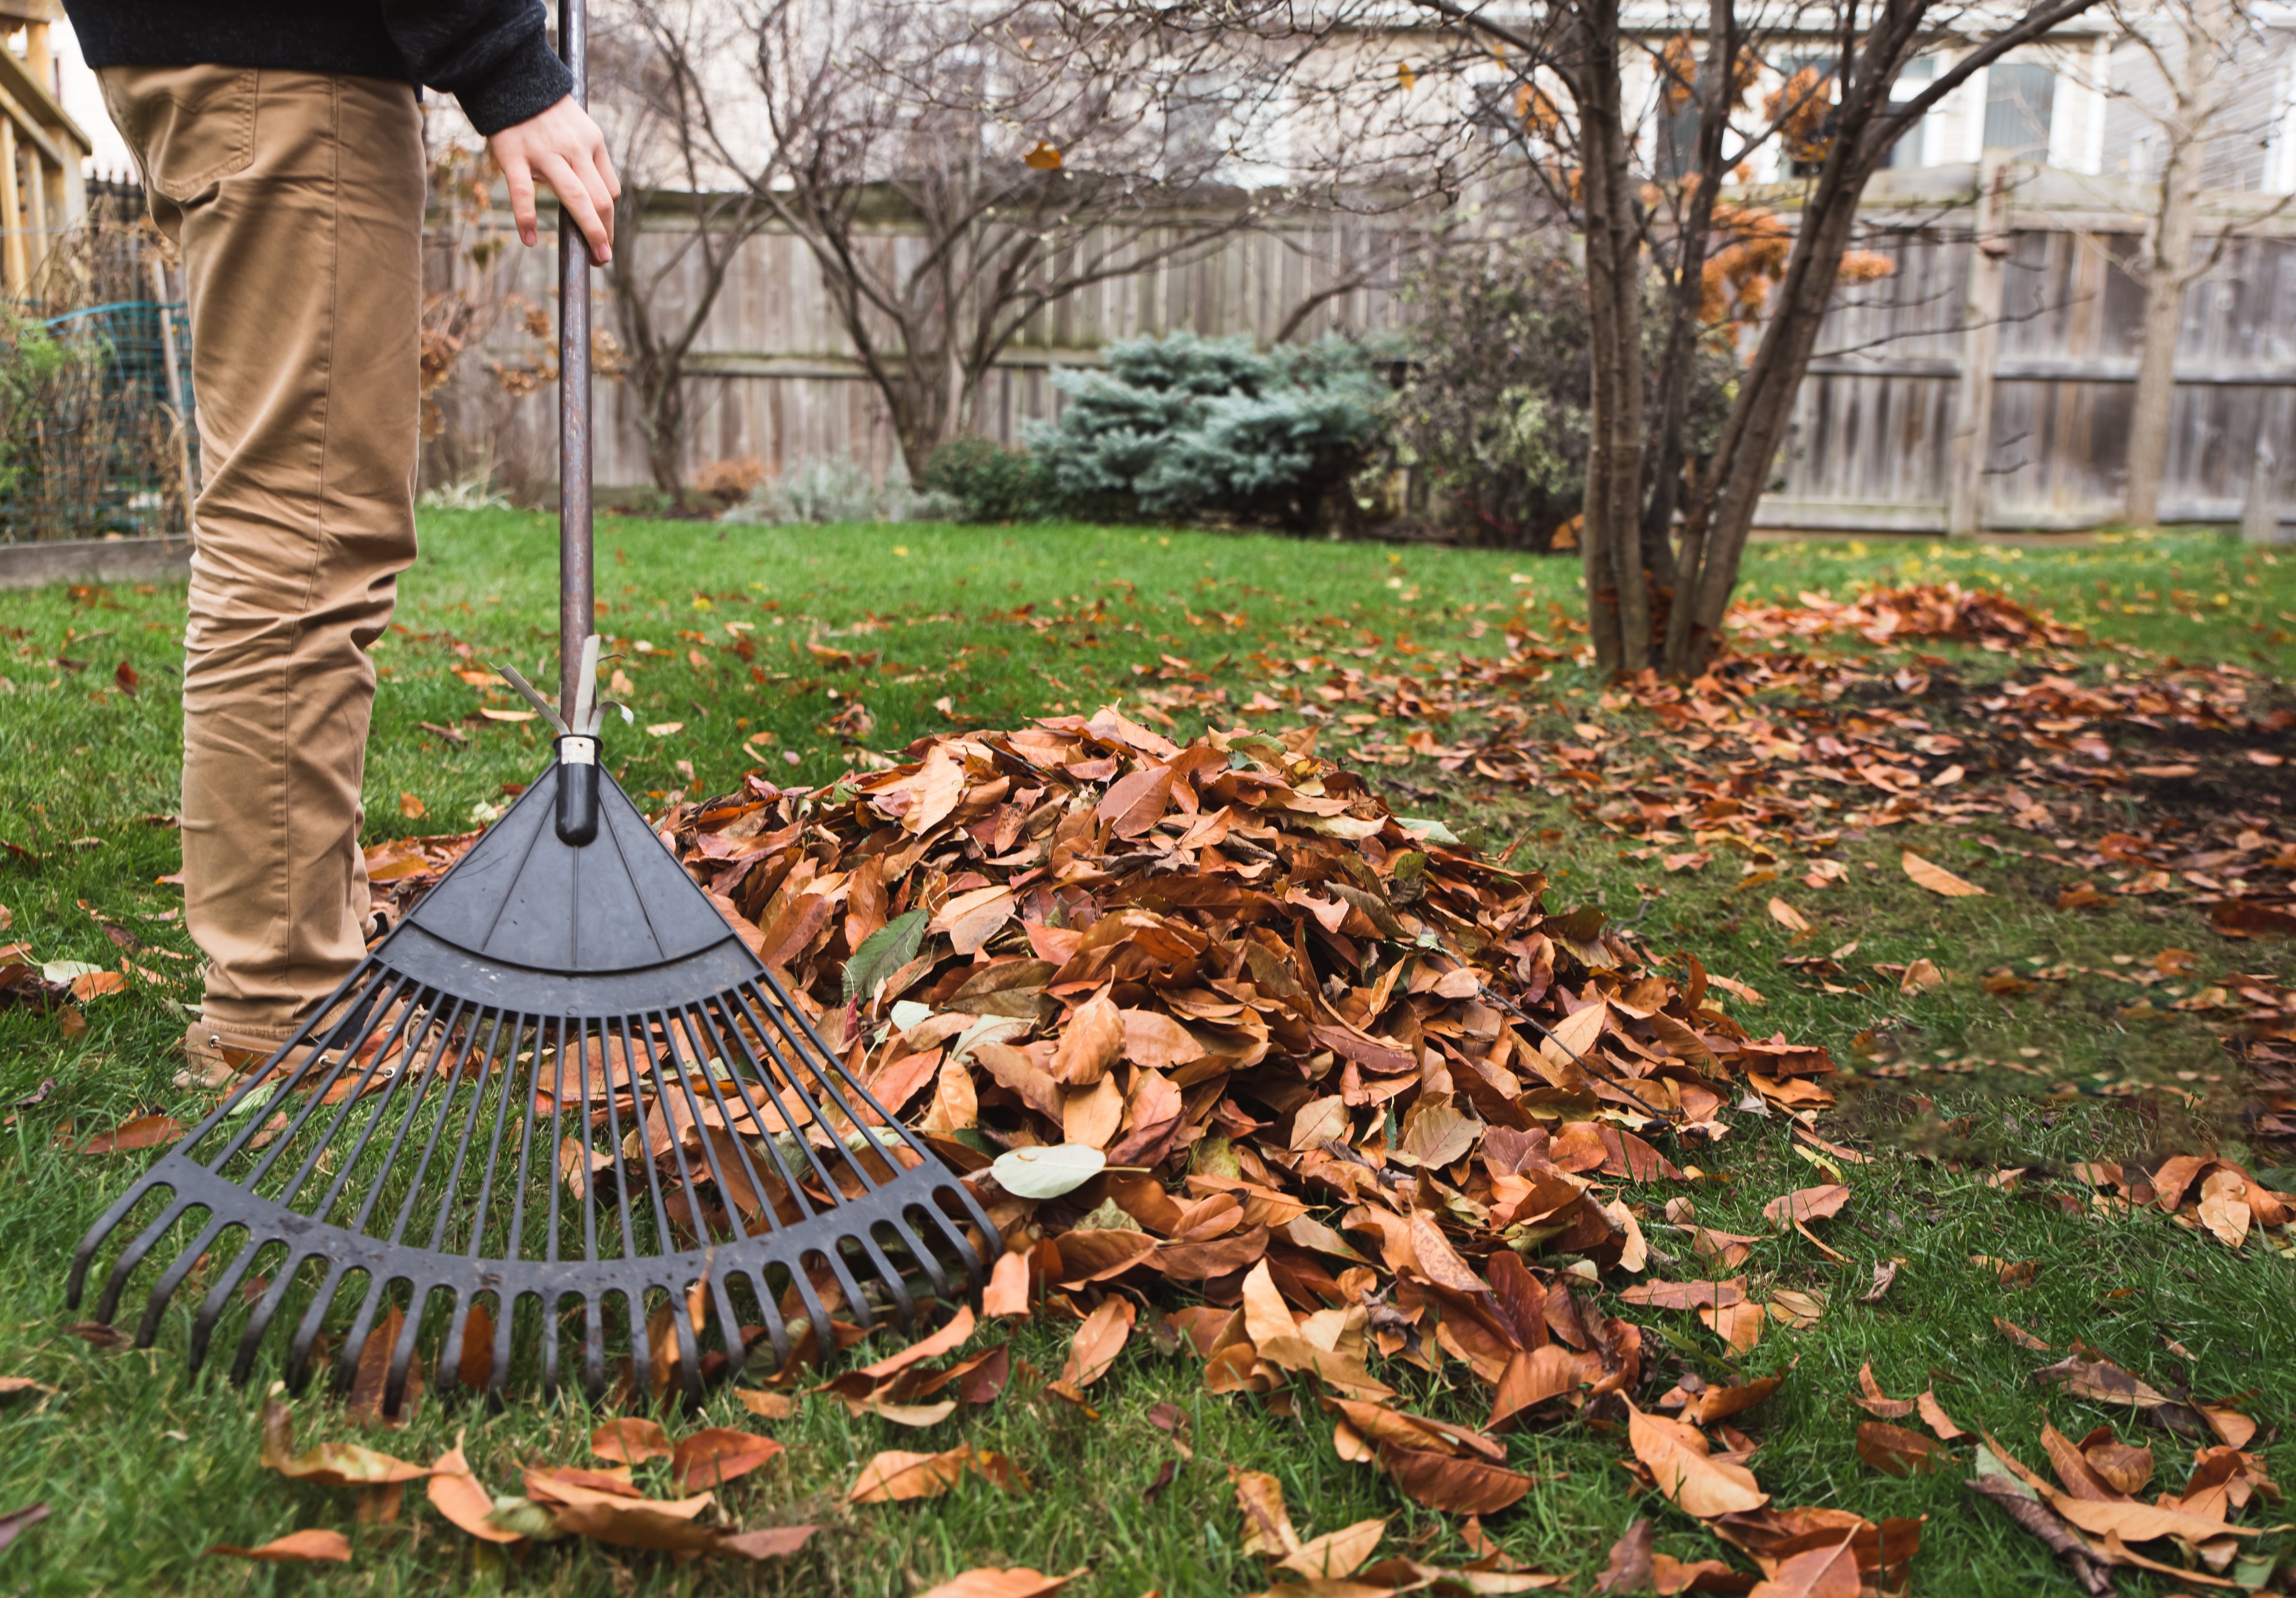 Person using a rake to gather fallen leaves in a backyard